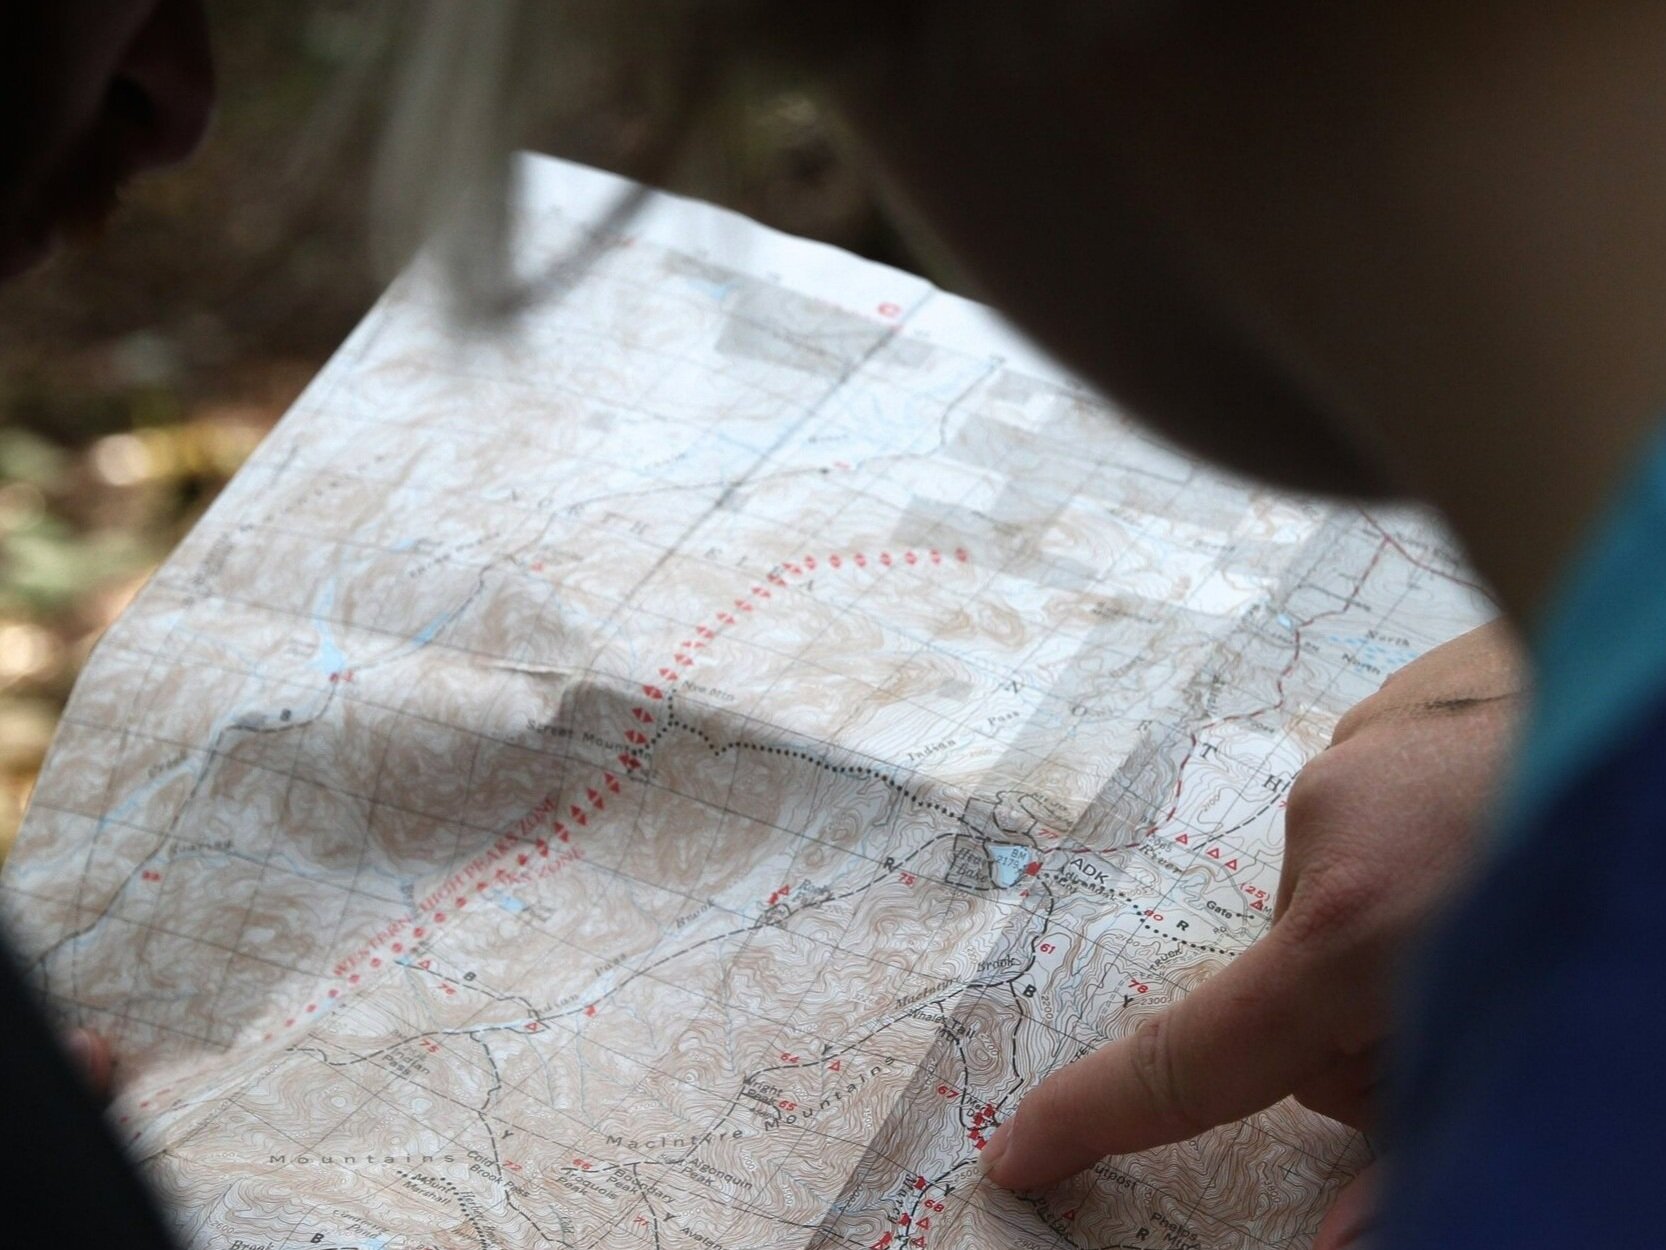 Create a trail map and choose new paths with purpose.